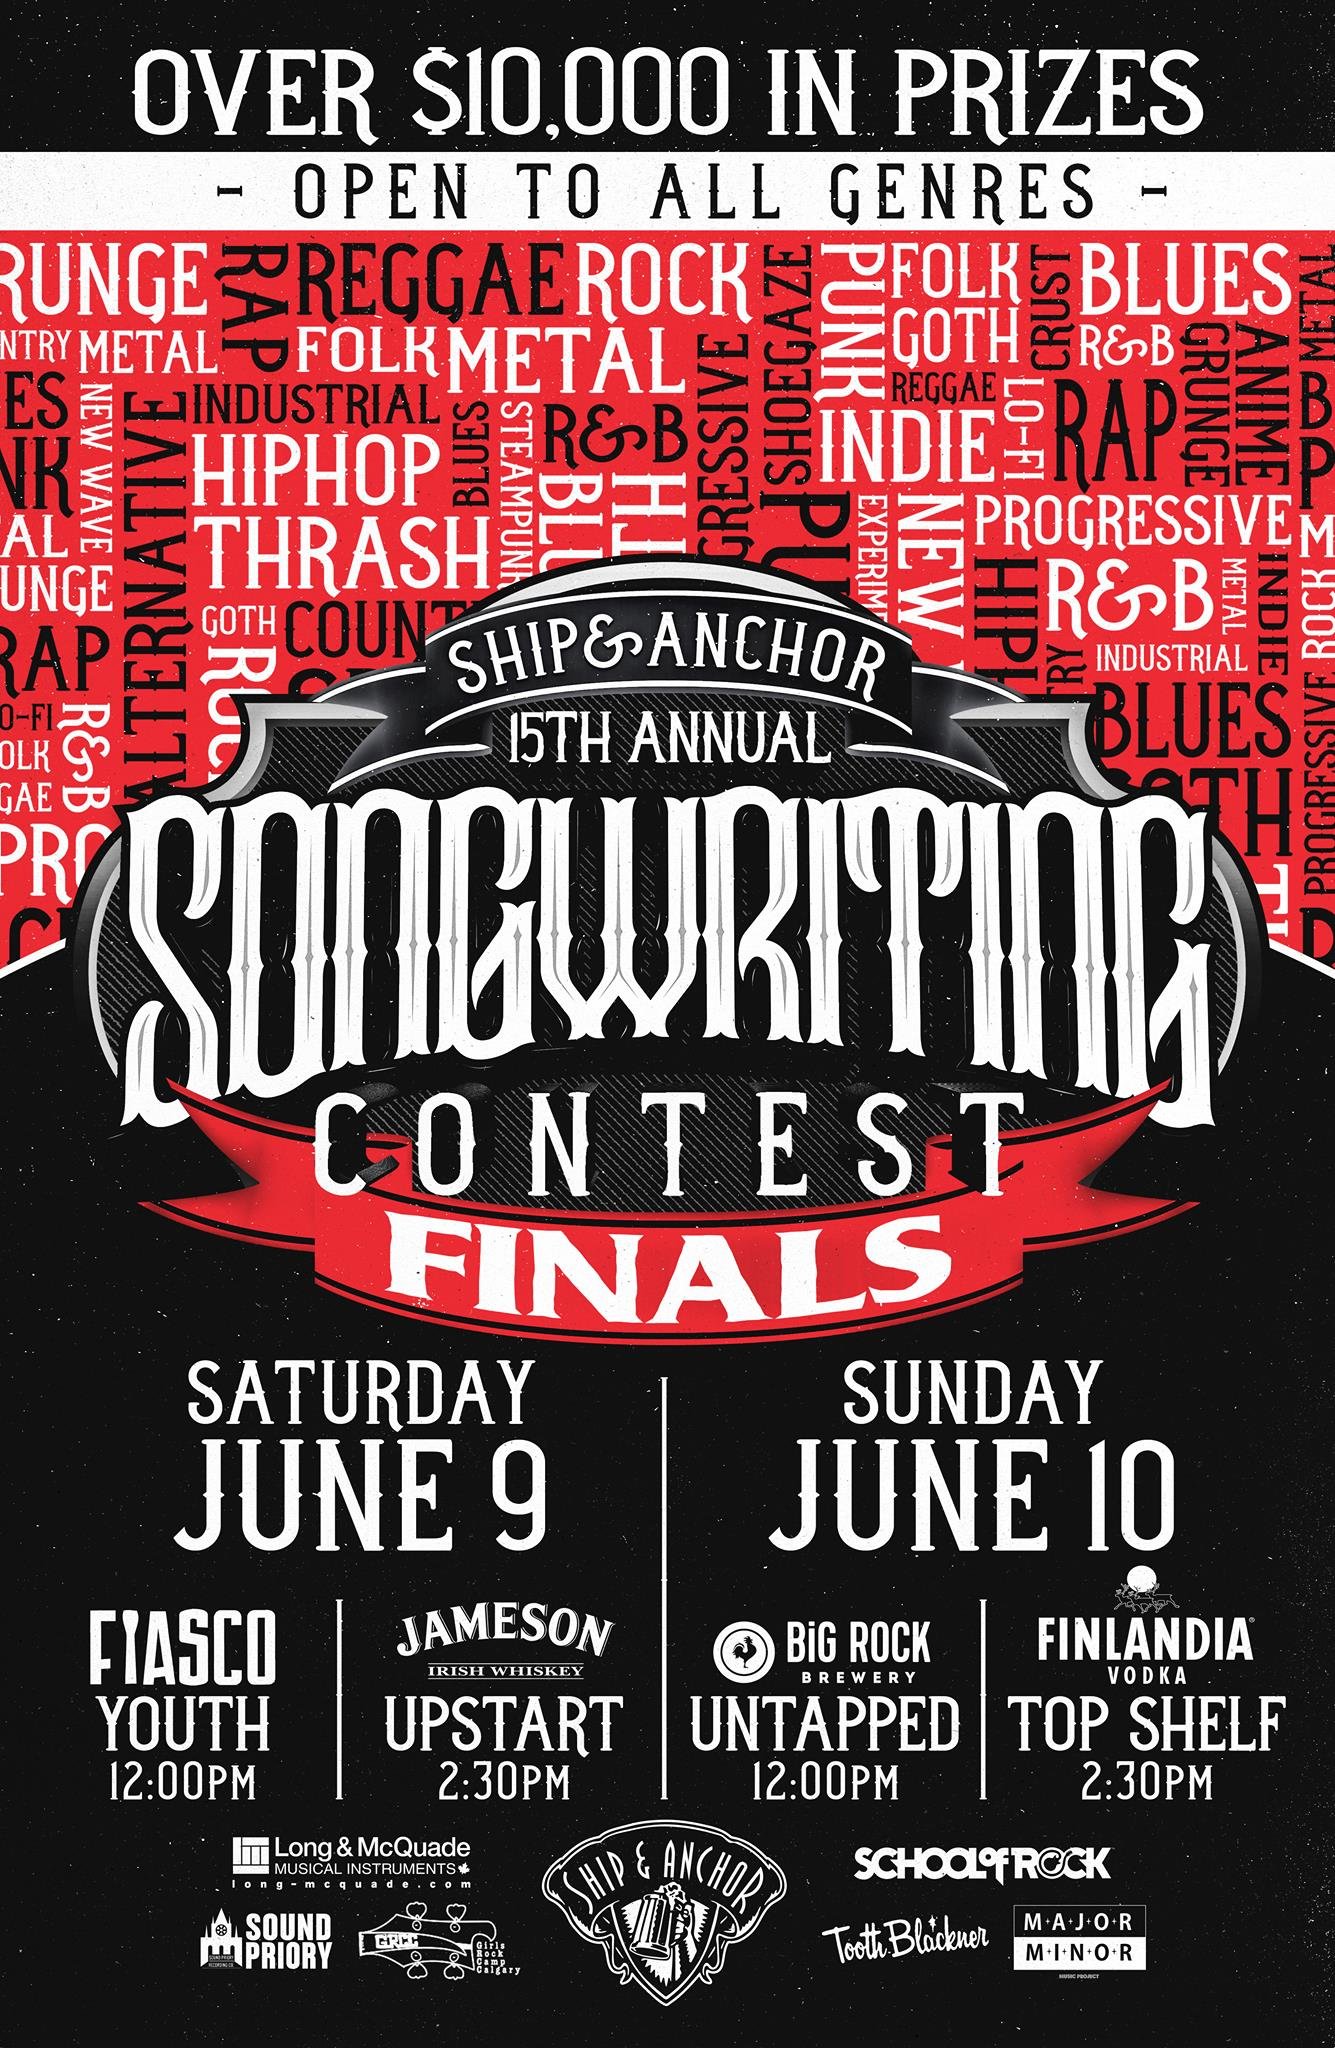 2018-06-10 Ship songwriters contest POSTER.JPG